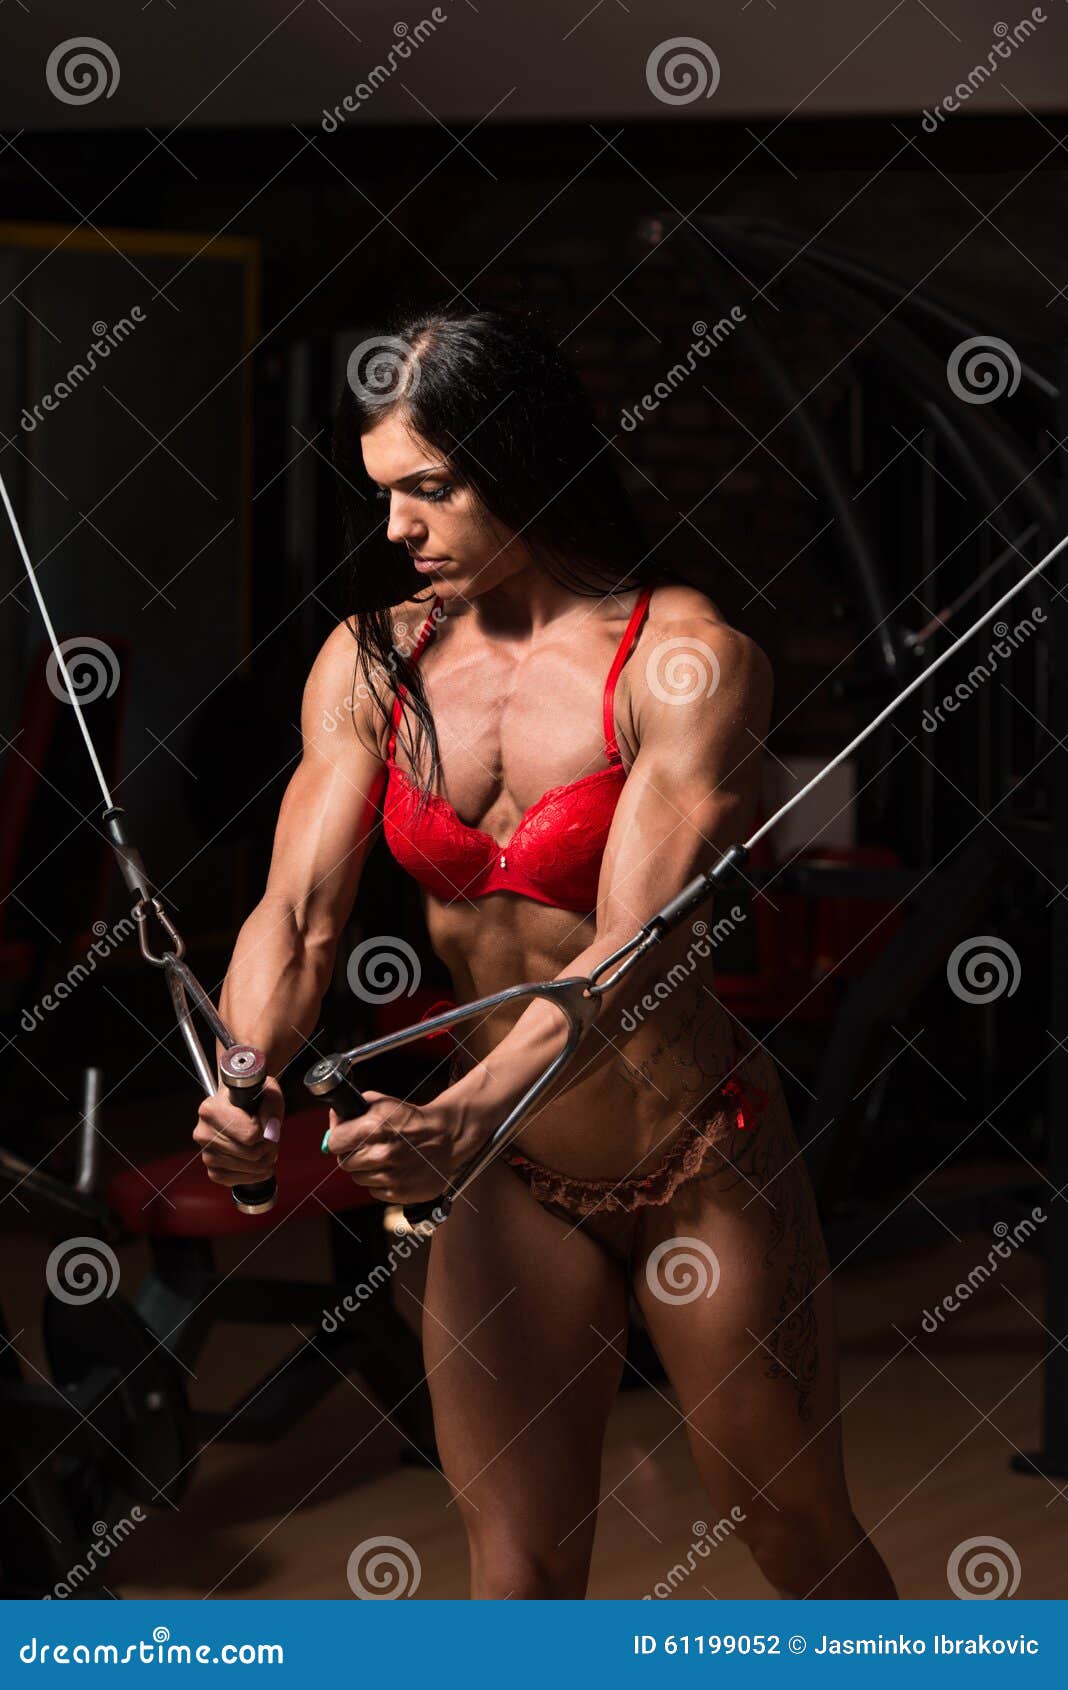 https://thumbs.dreamstime.com/z/chest-workout-cables-underwear-young-woman-working-her-cable-crossover-dark-gym-61199052.jpg